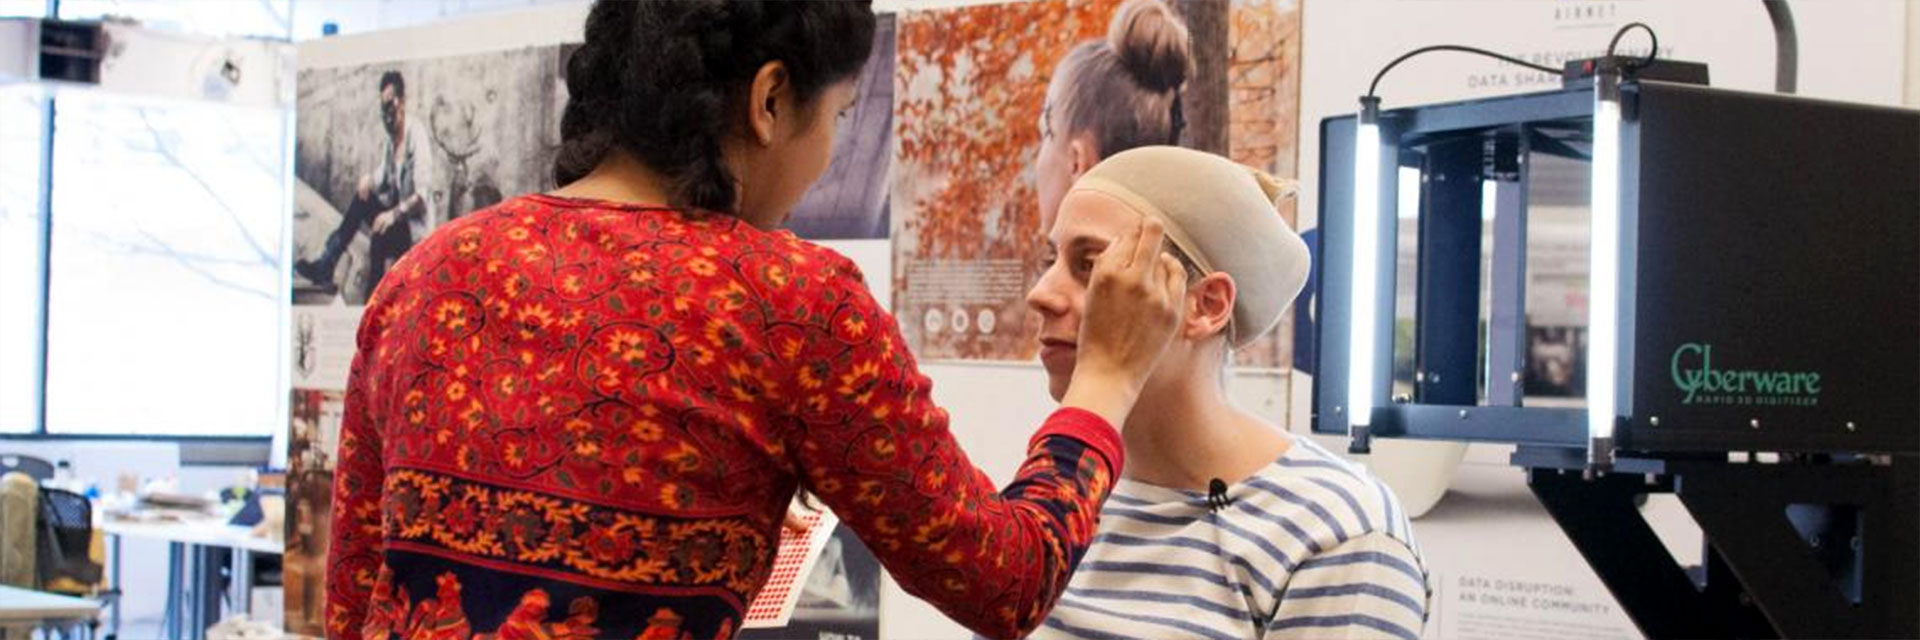 A student prepares a fellow student's face for 3D scanning.